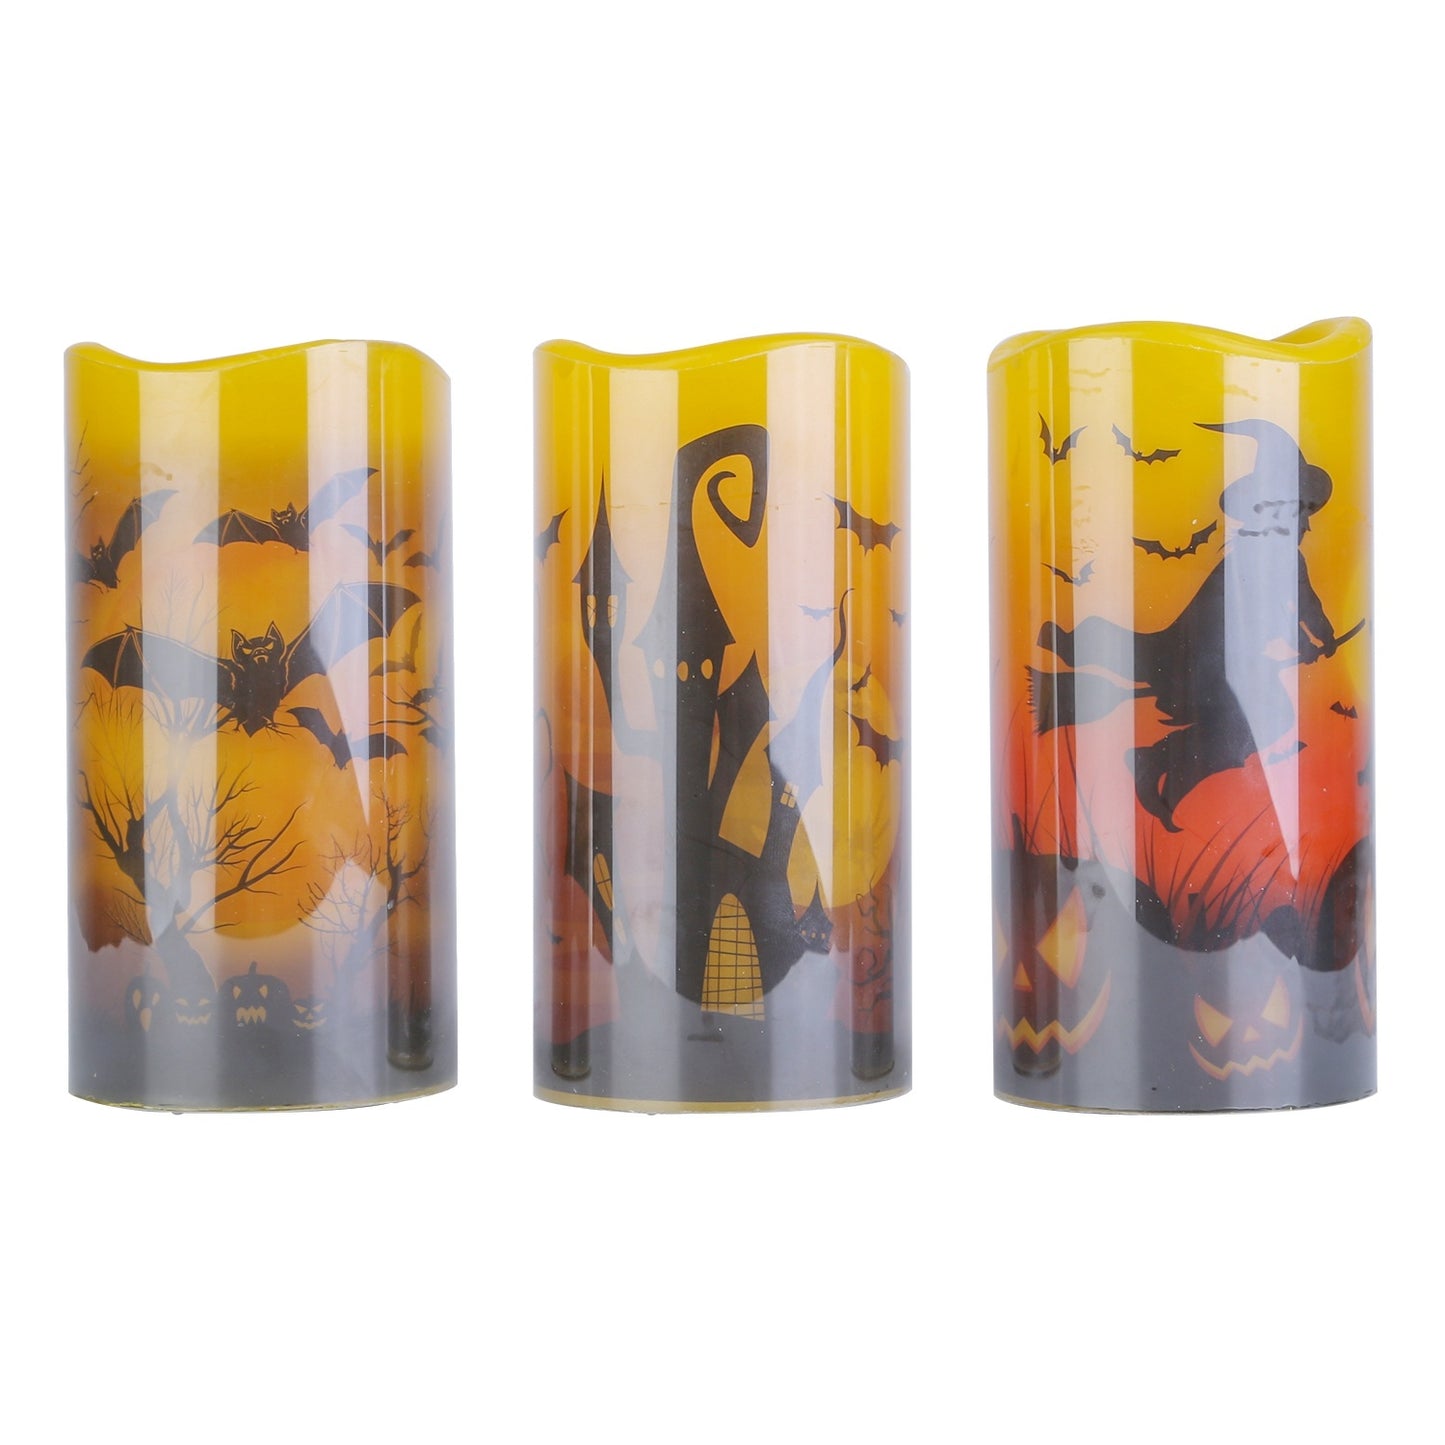 3 Pack Halloween Flameless Candle Lamp with Timer Setting Battery Operated Warm Orange Light Candles for Halloween Party Decoration Spider Crow Skull